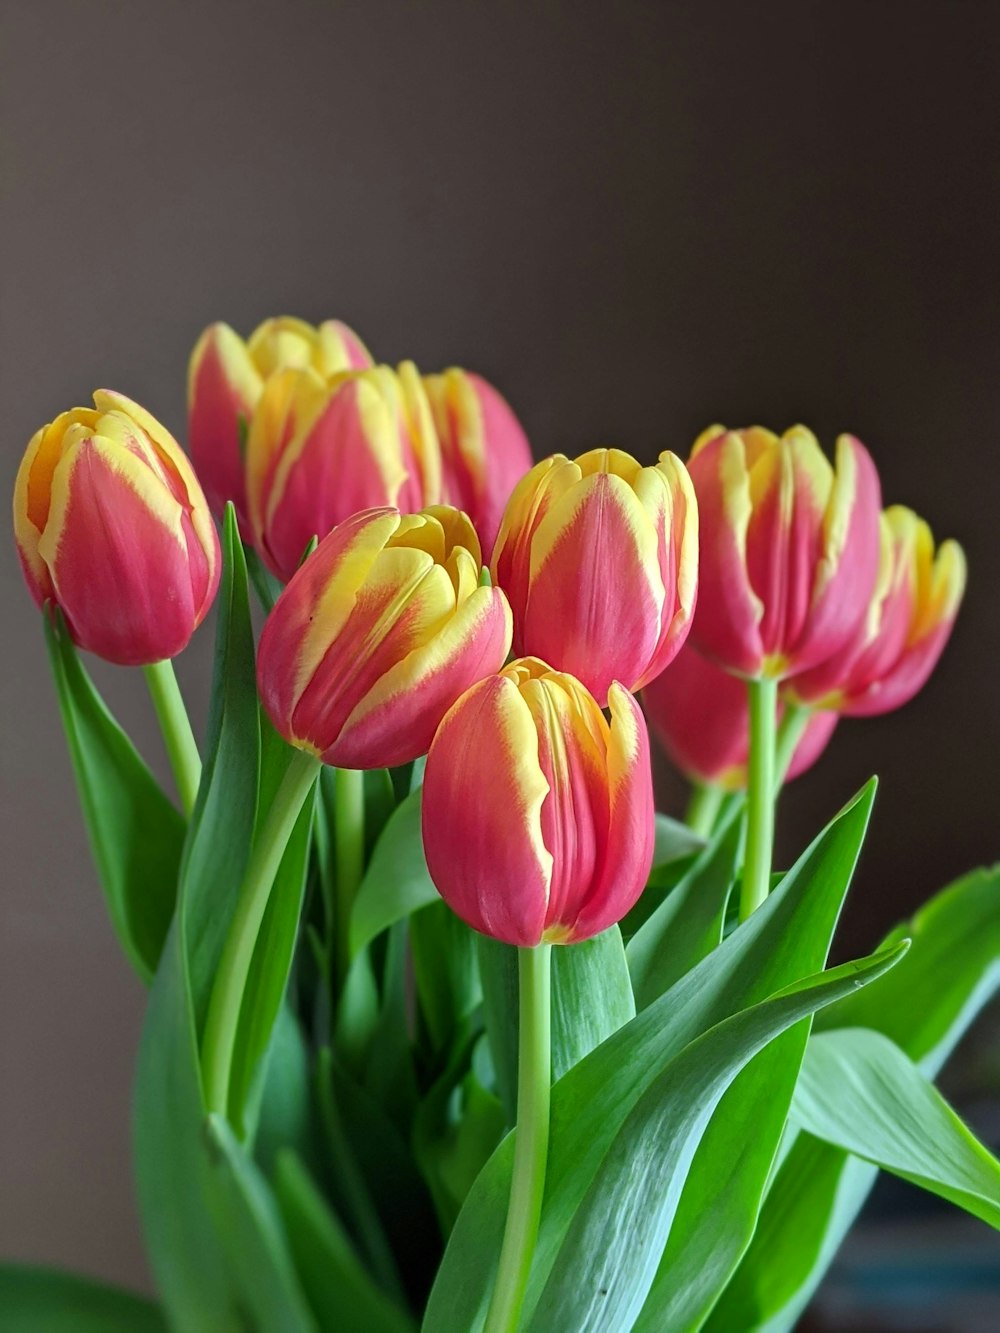 pink and yellow tulips in bloom